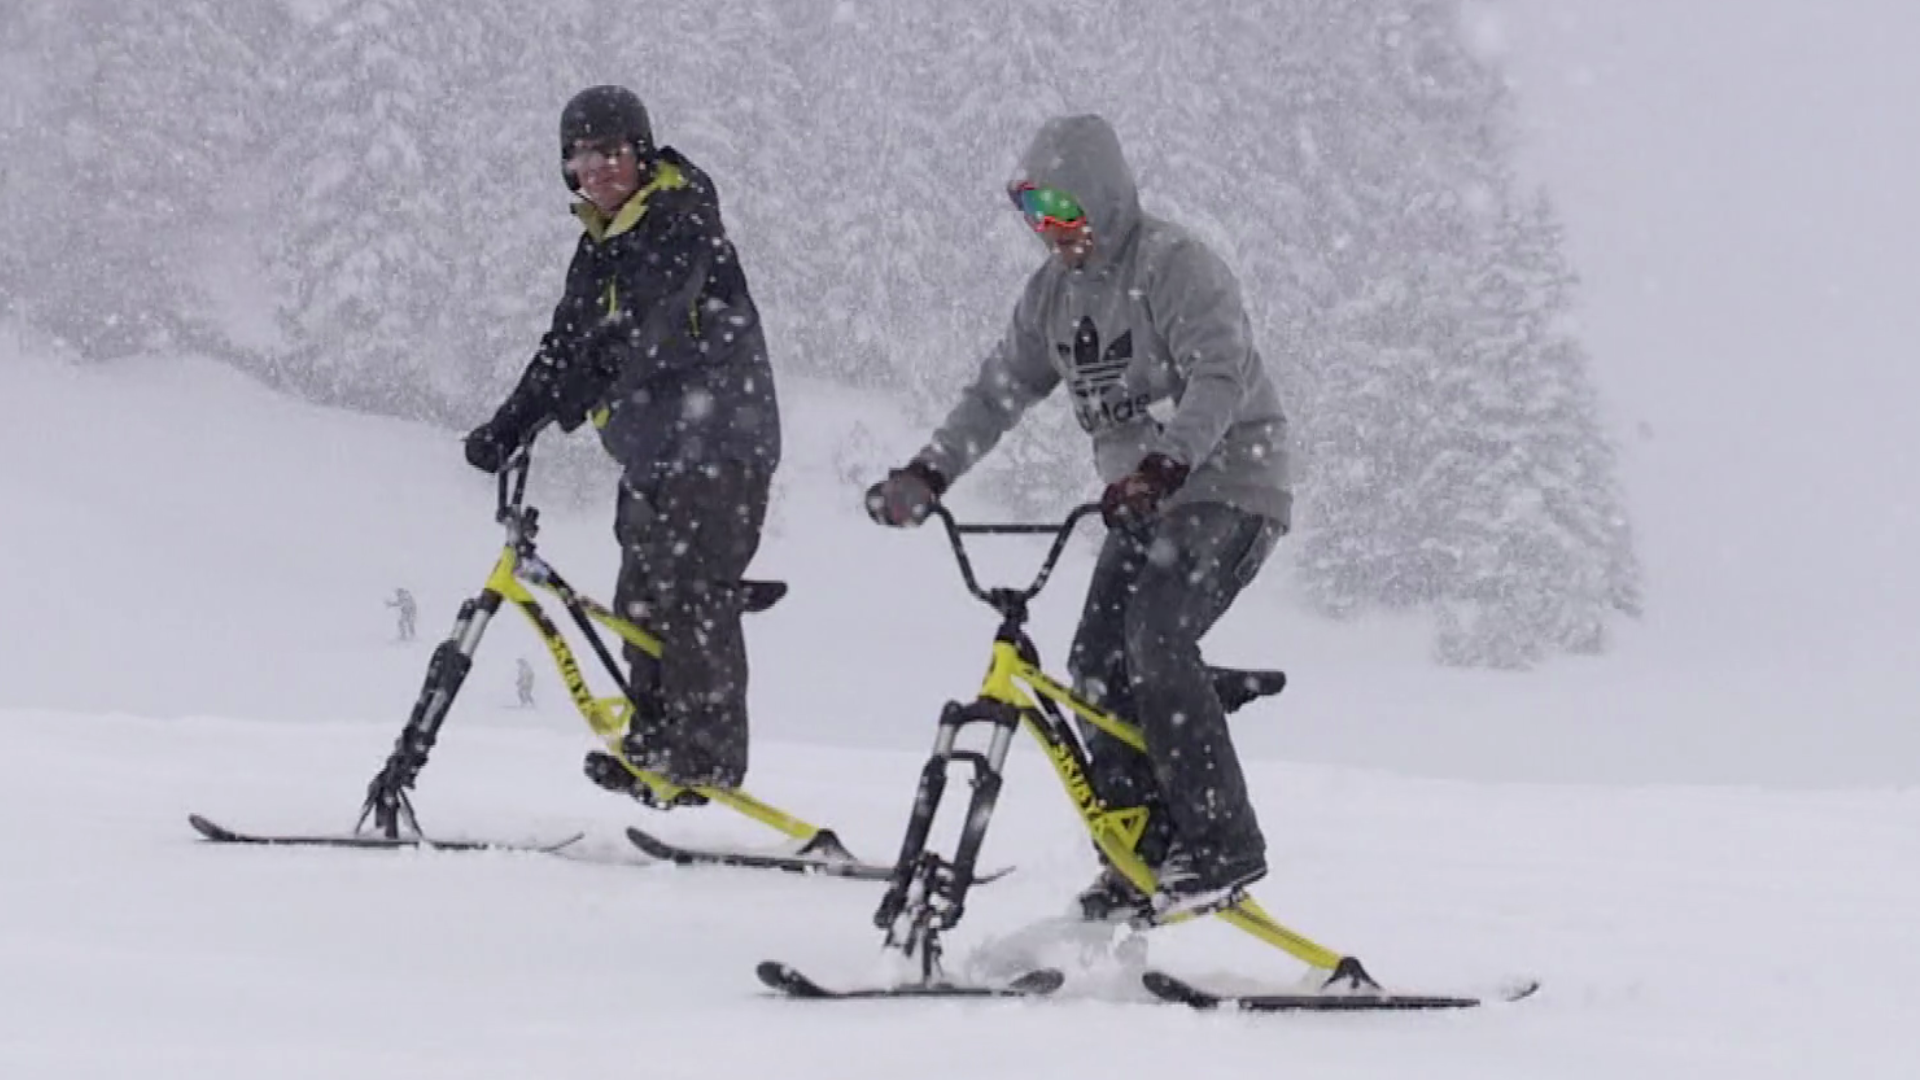 Skibyk is a new extreme winter sport at the summit is a cross between mountain biking, skiing, and snowboarding.